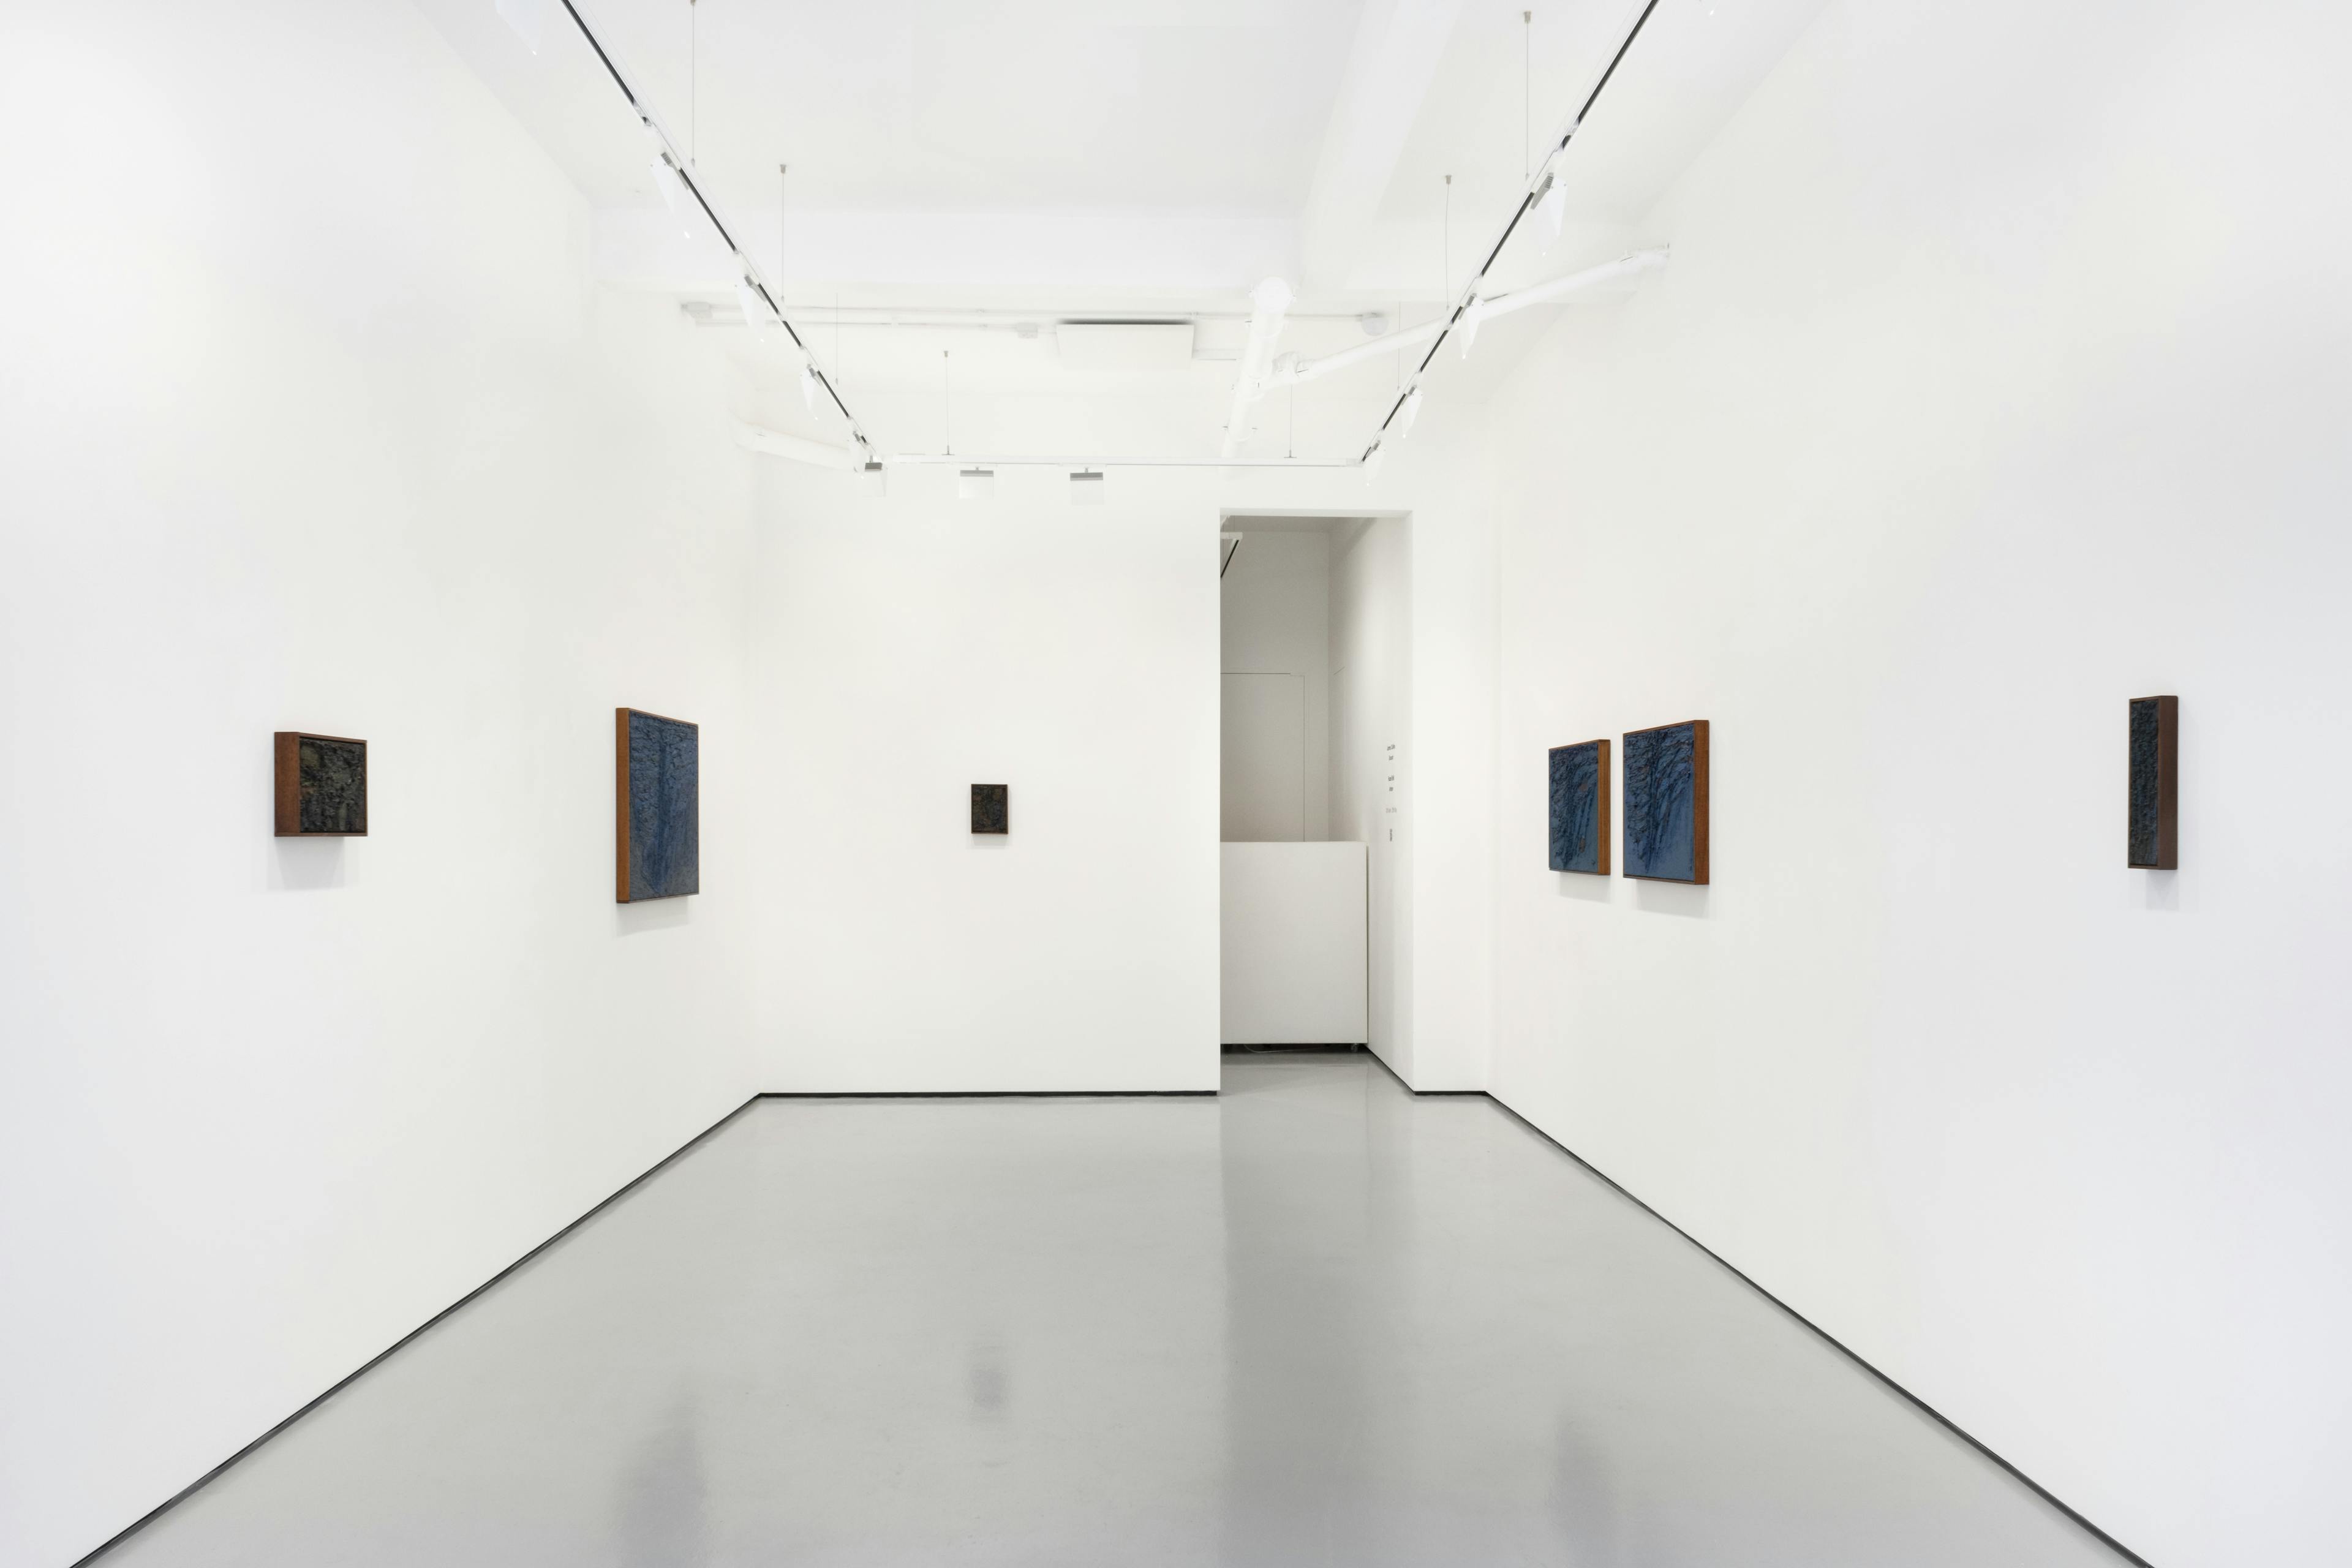 An installation image of James Collins solo exhibition in a white walled gallery space including 6 thick impasto paintings in dark wooden frames